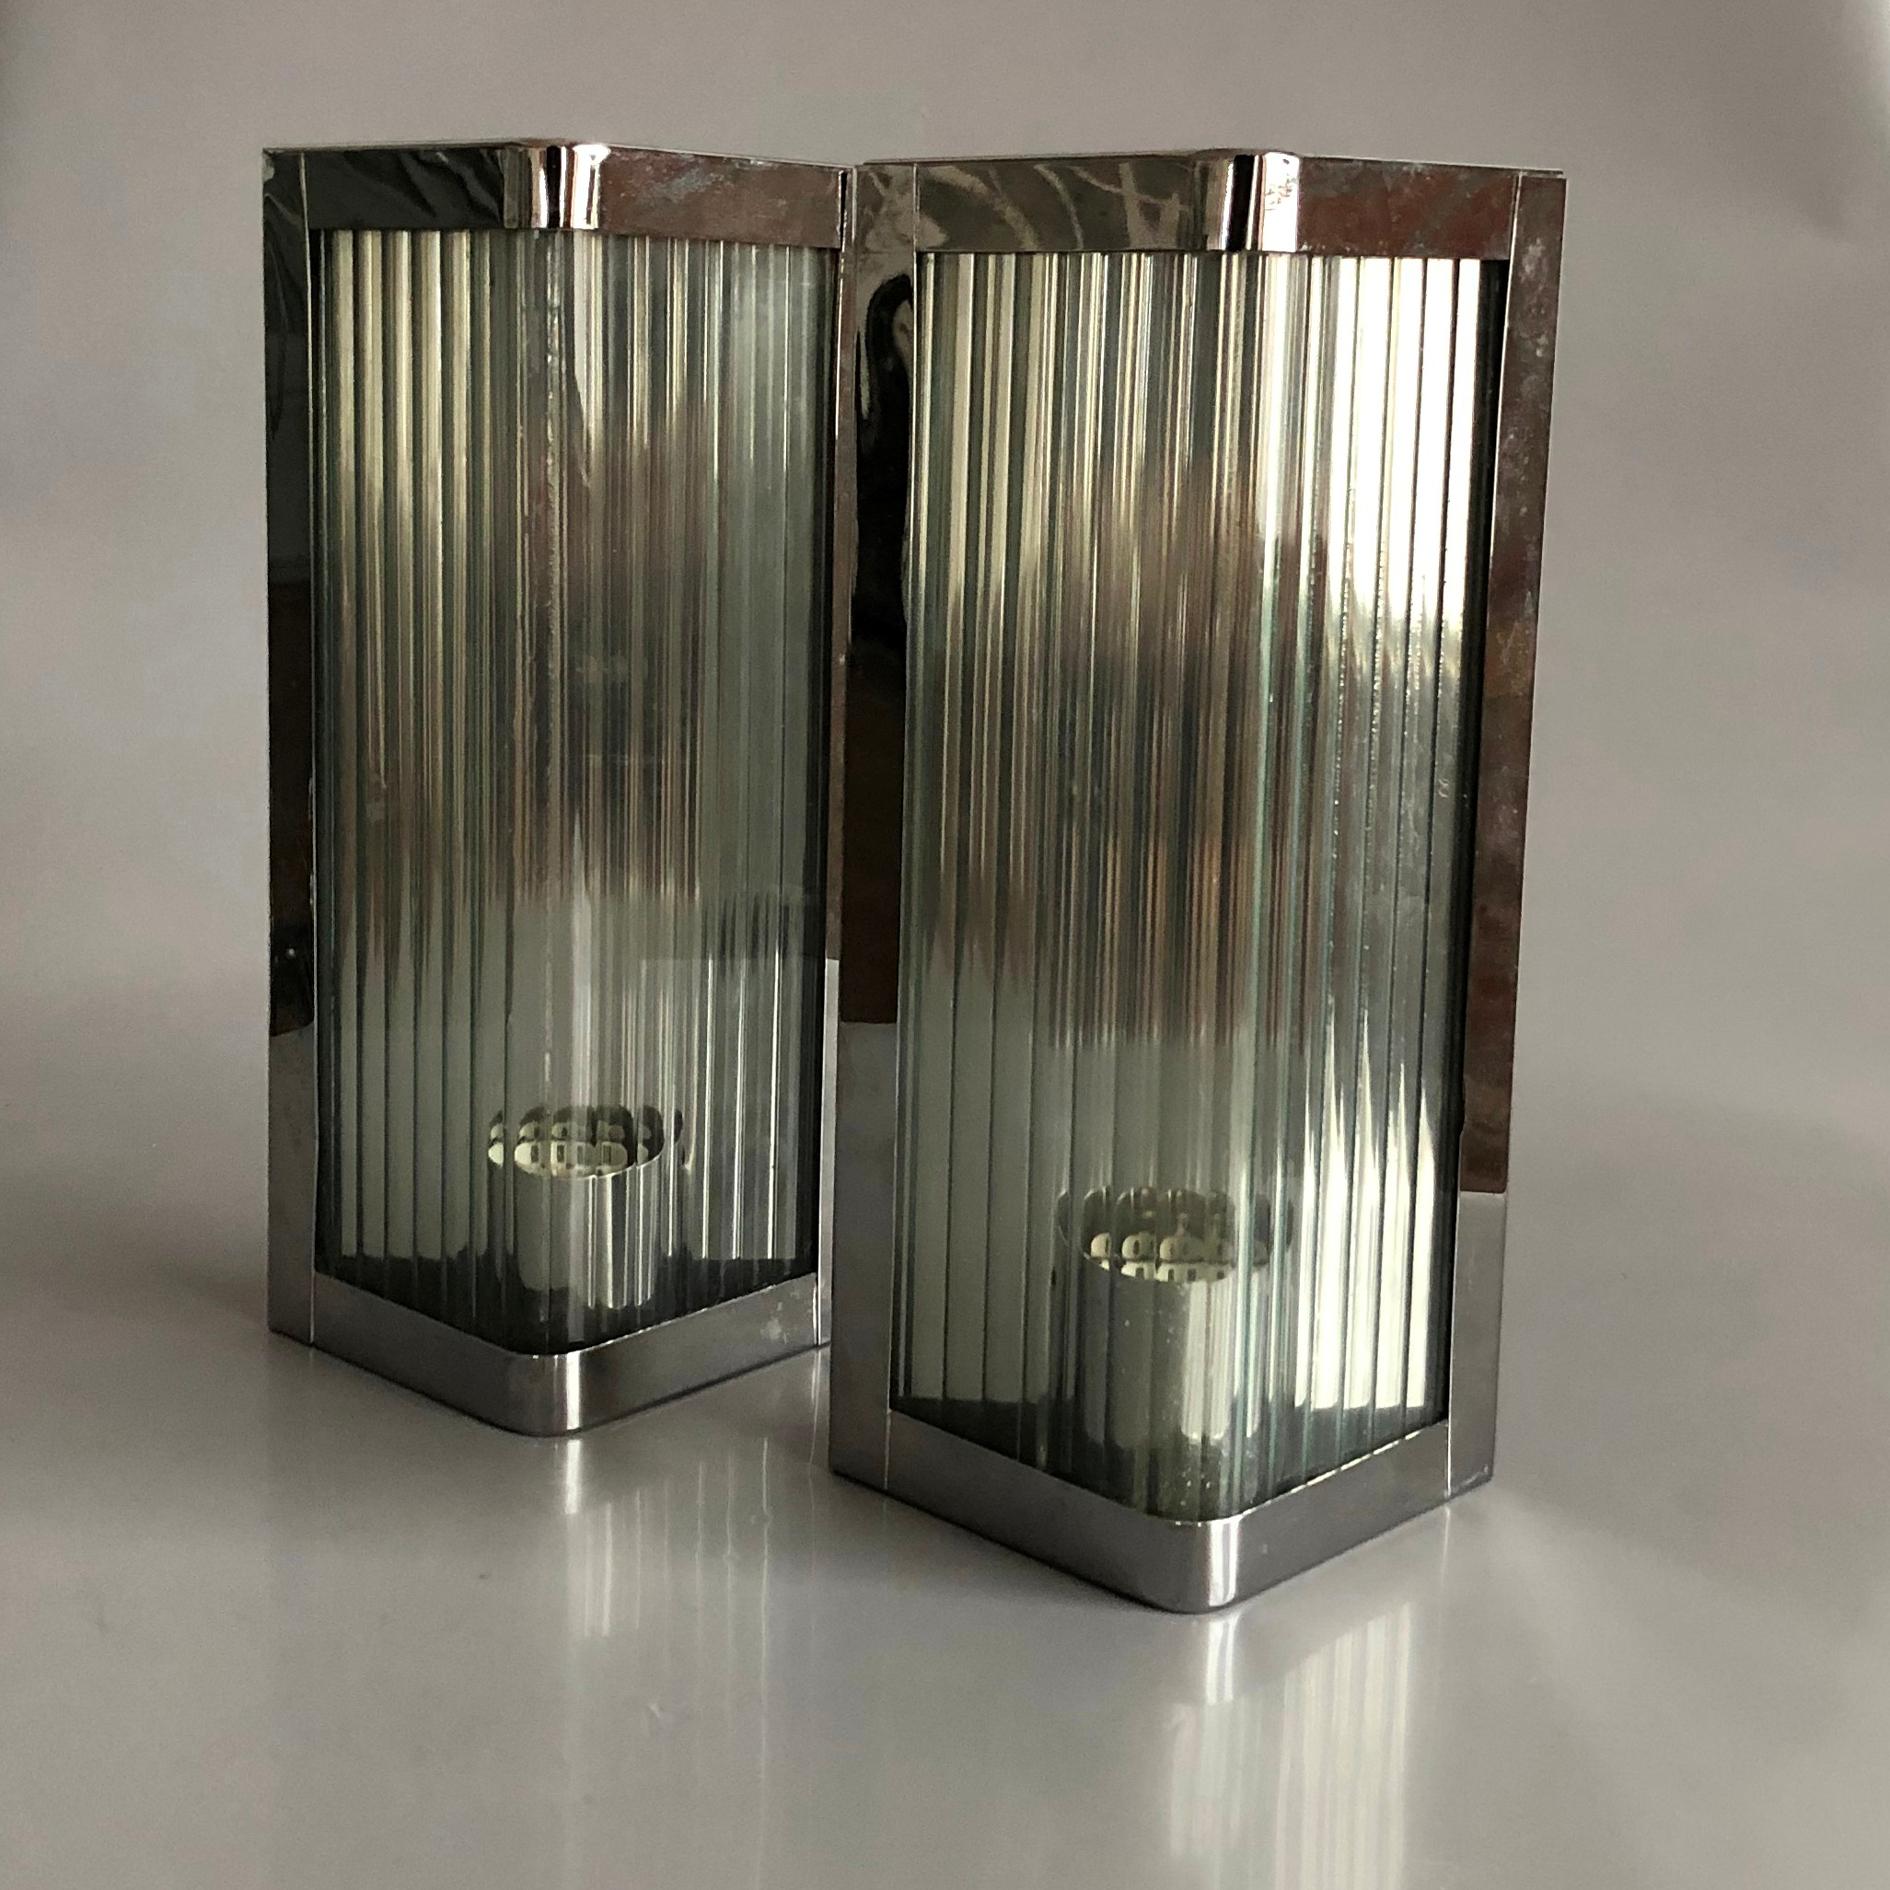 Triangle Form Polished Stainles Steel and Reeded Glass Wall Lights, Italy, 1990s (Italienisch) im Angebot